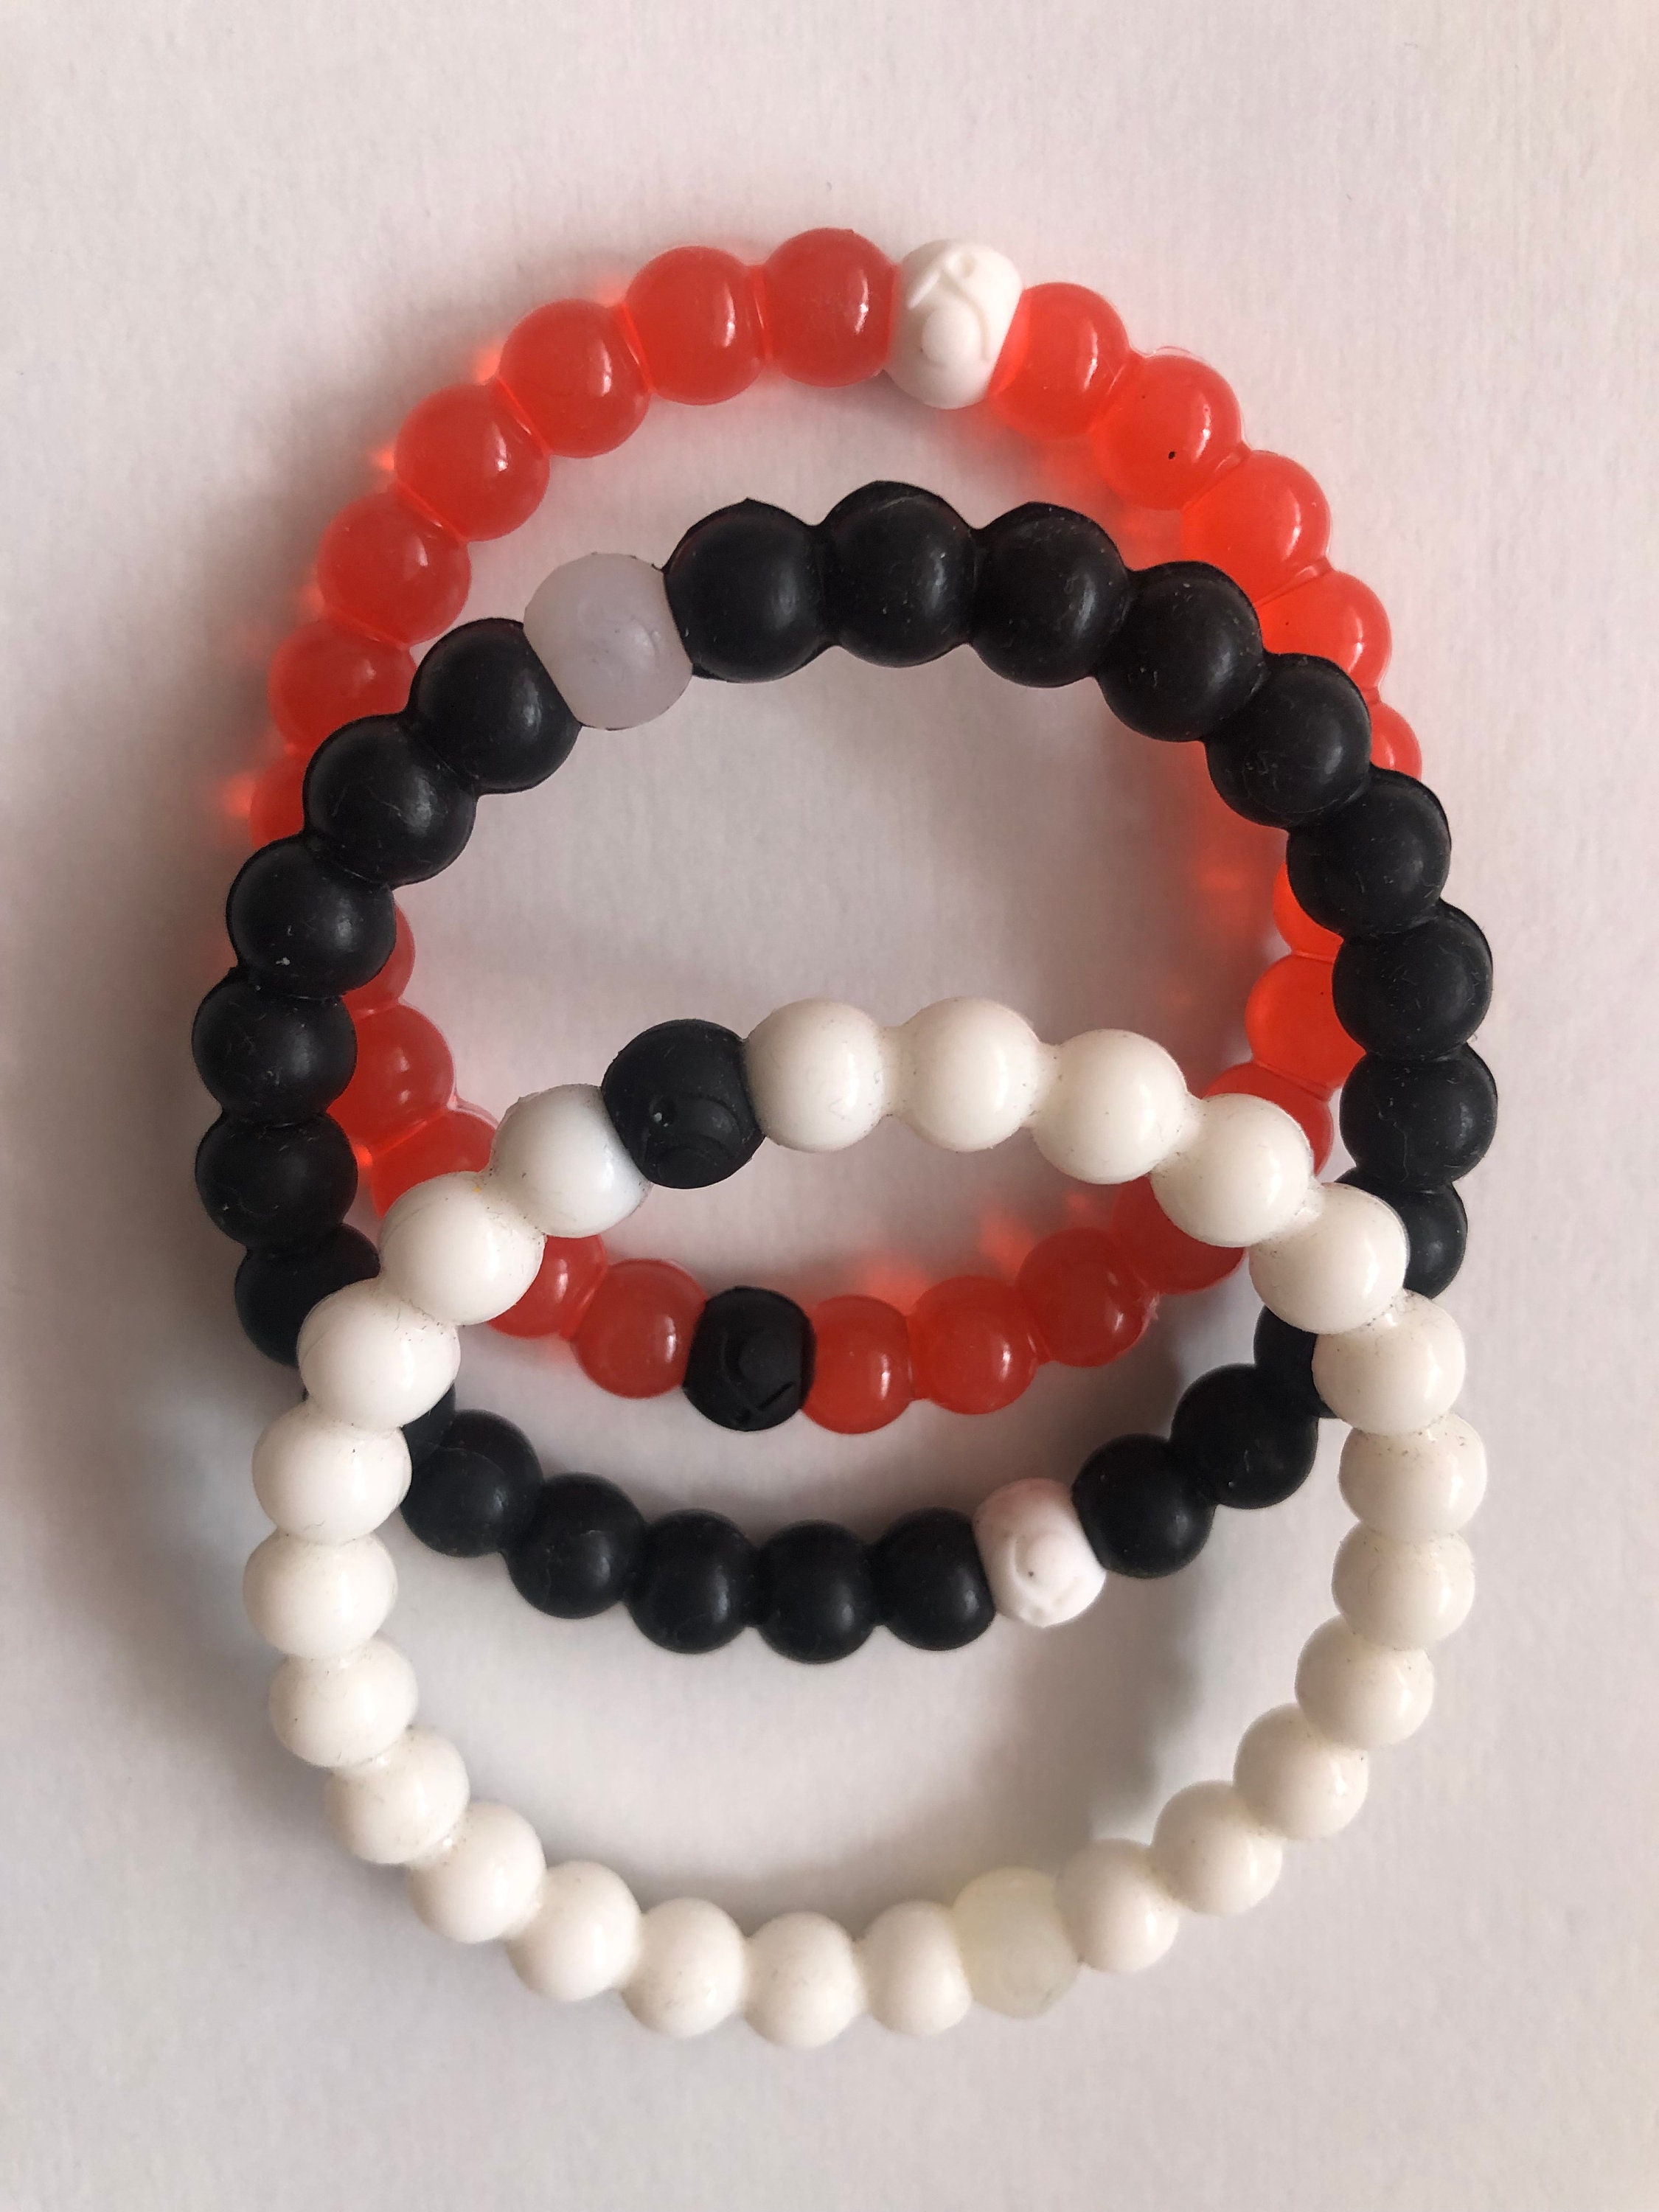 OVER] lokai Bracelet Review and Giveaway - Glamorable